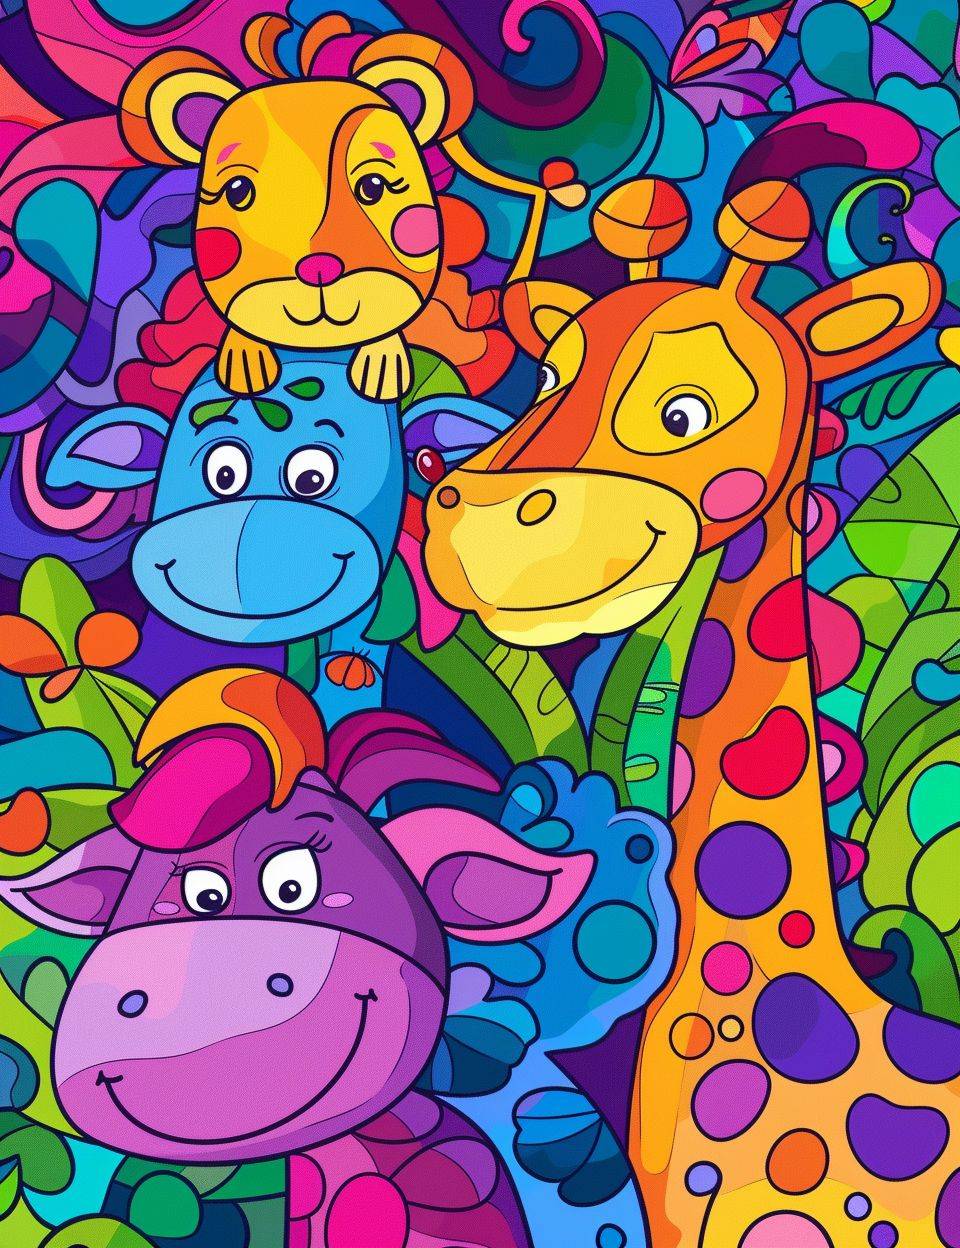 Colorful illustration of animals and babies, no text in image, coloring background, illustration, cover